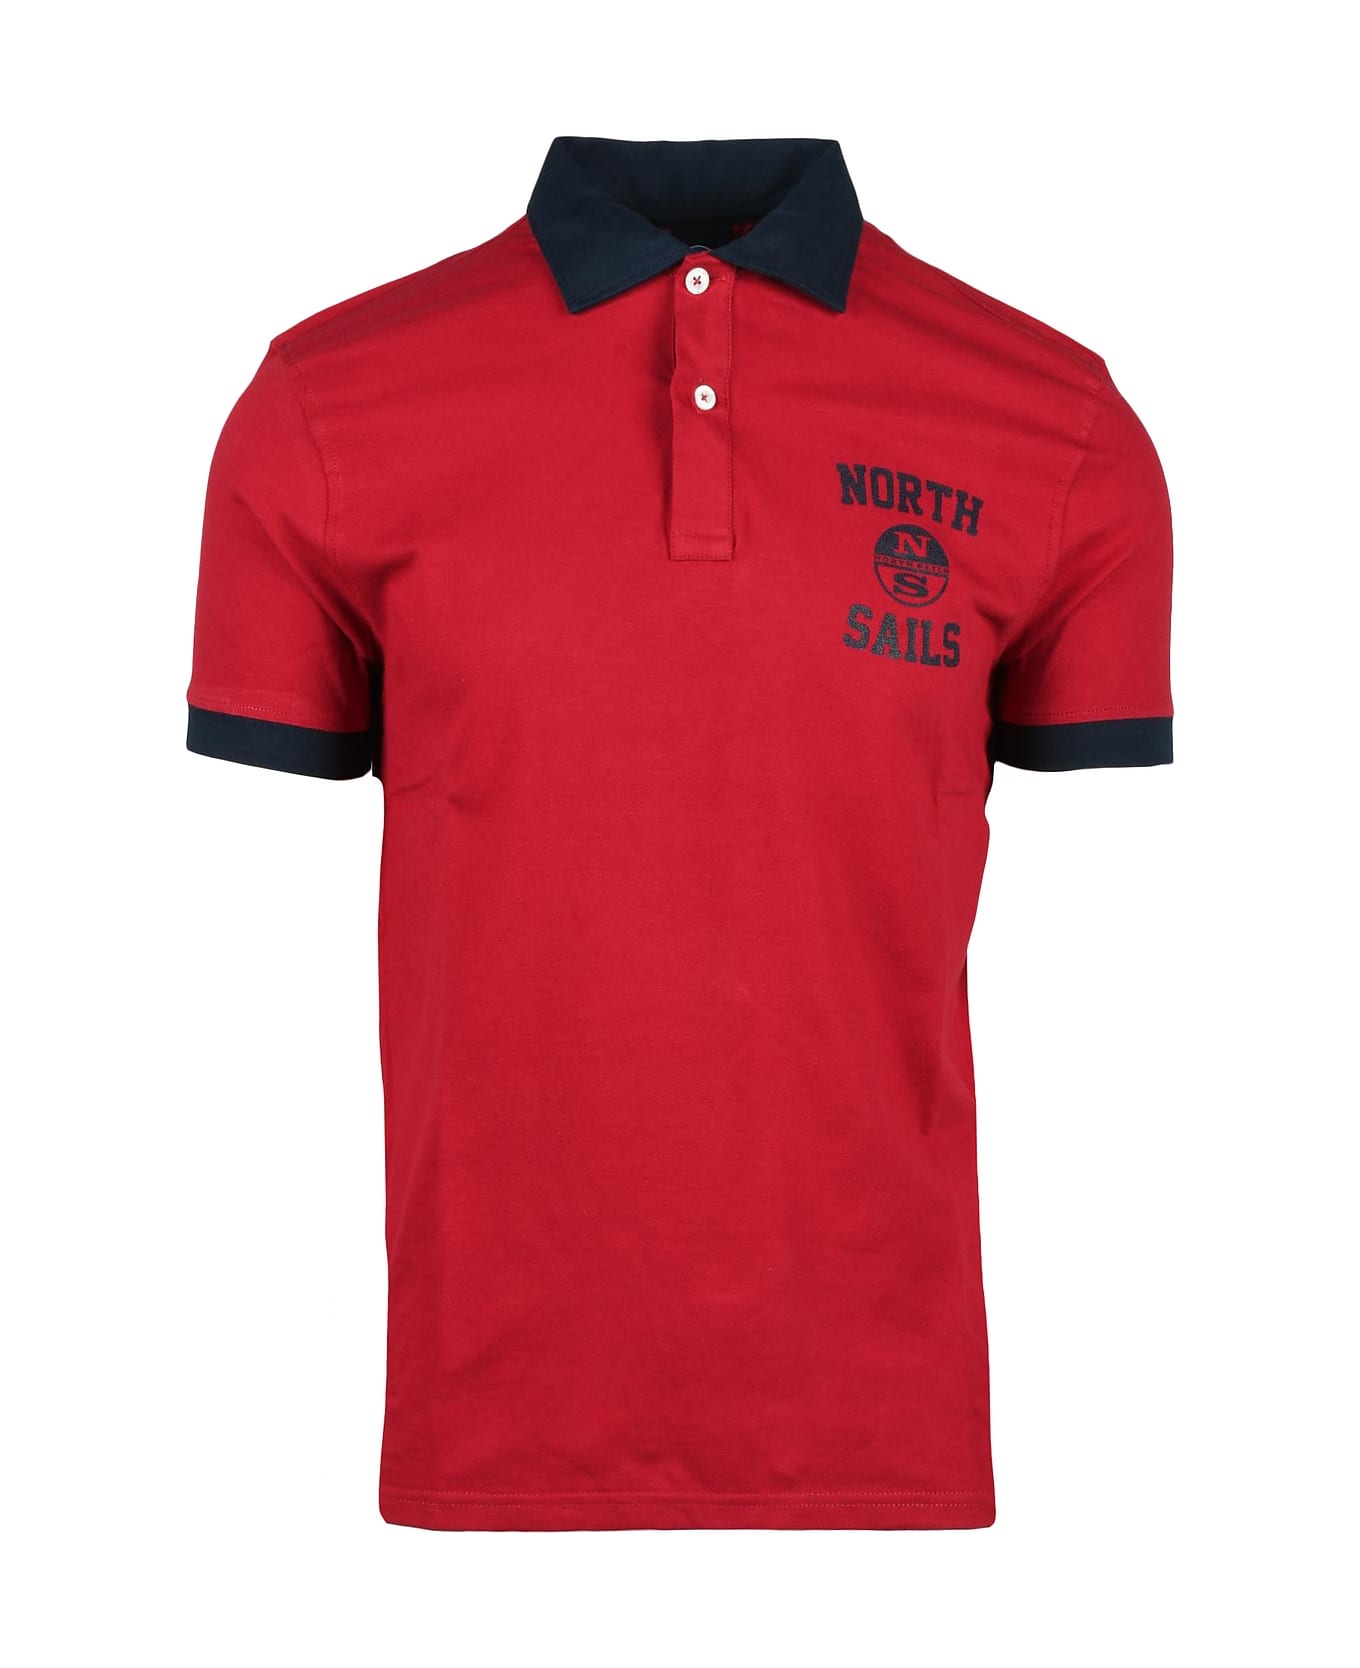 North Sails Men's Red Shirt - Red